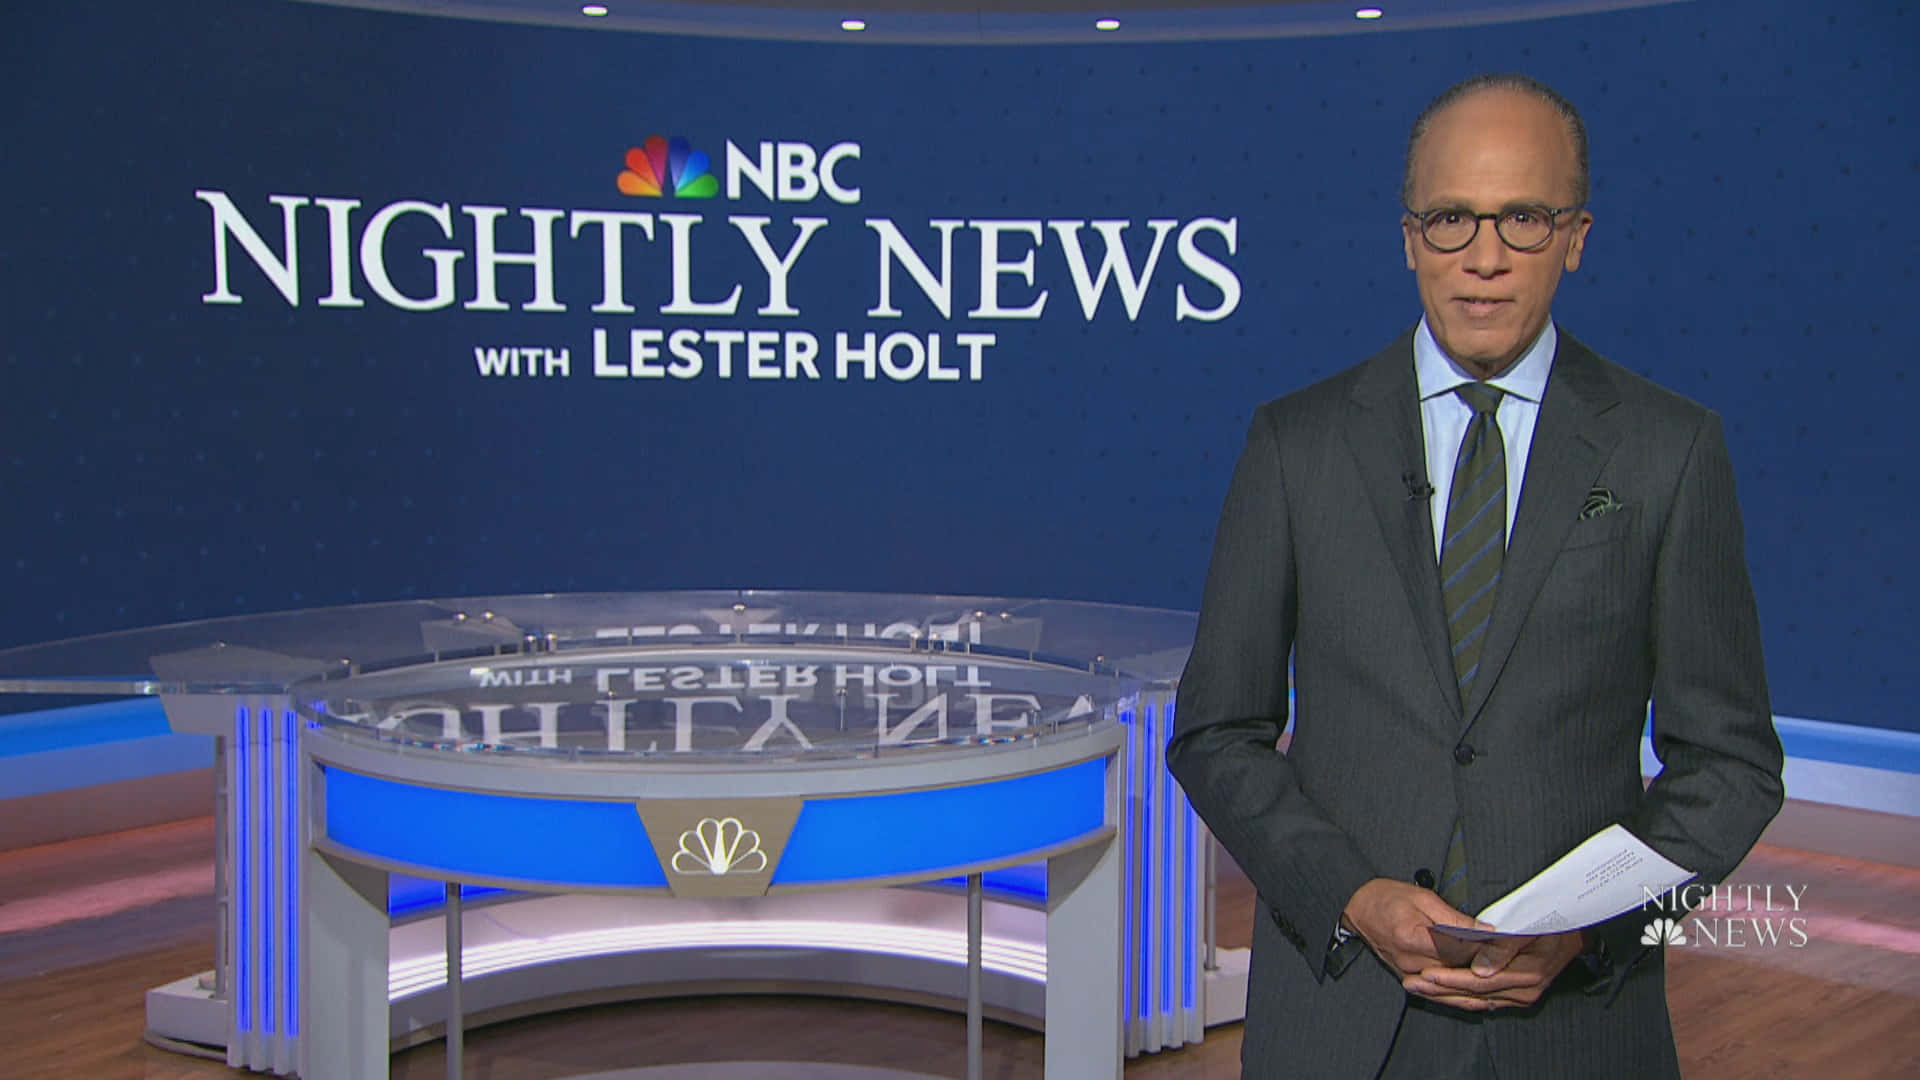 Nightly News With Lester Holt Picture